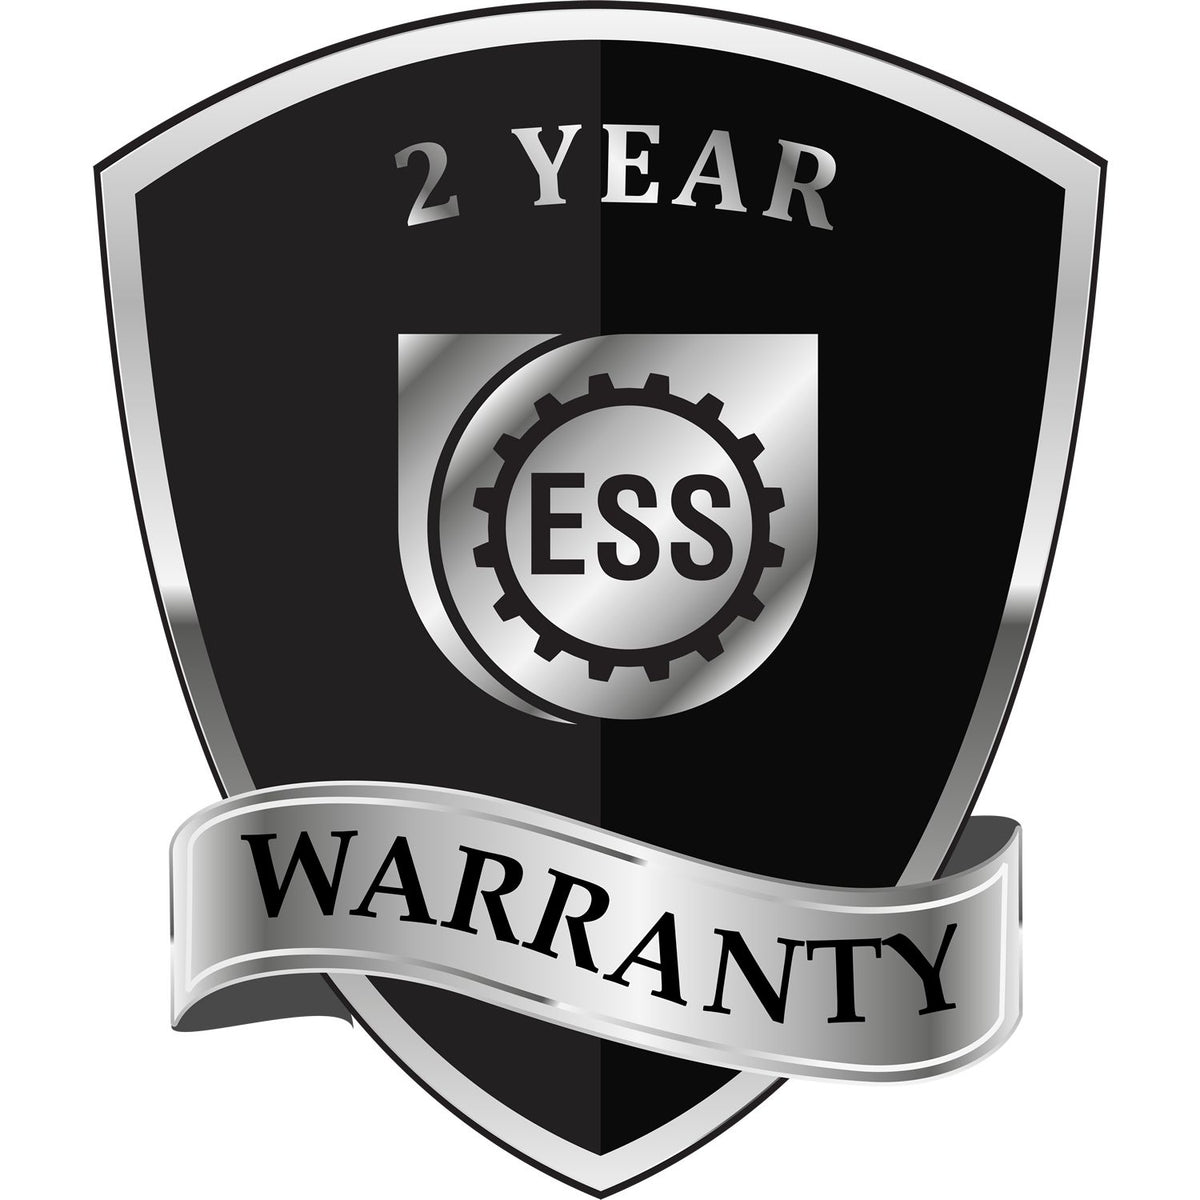 A black and silver badge or emblem showing warranty information for the State of Oregon Extended Long Reach Geologist Seal